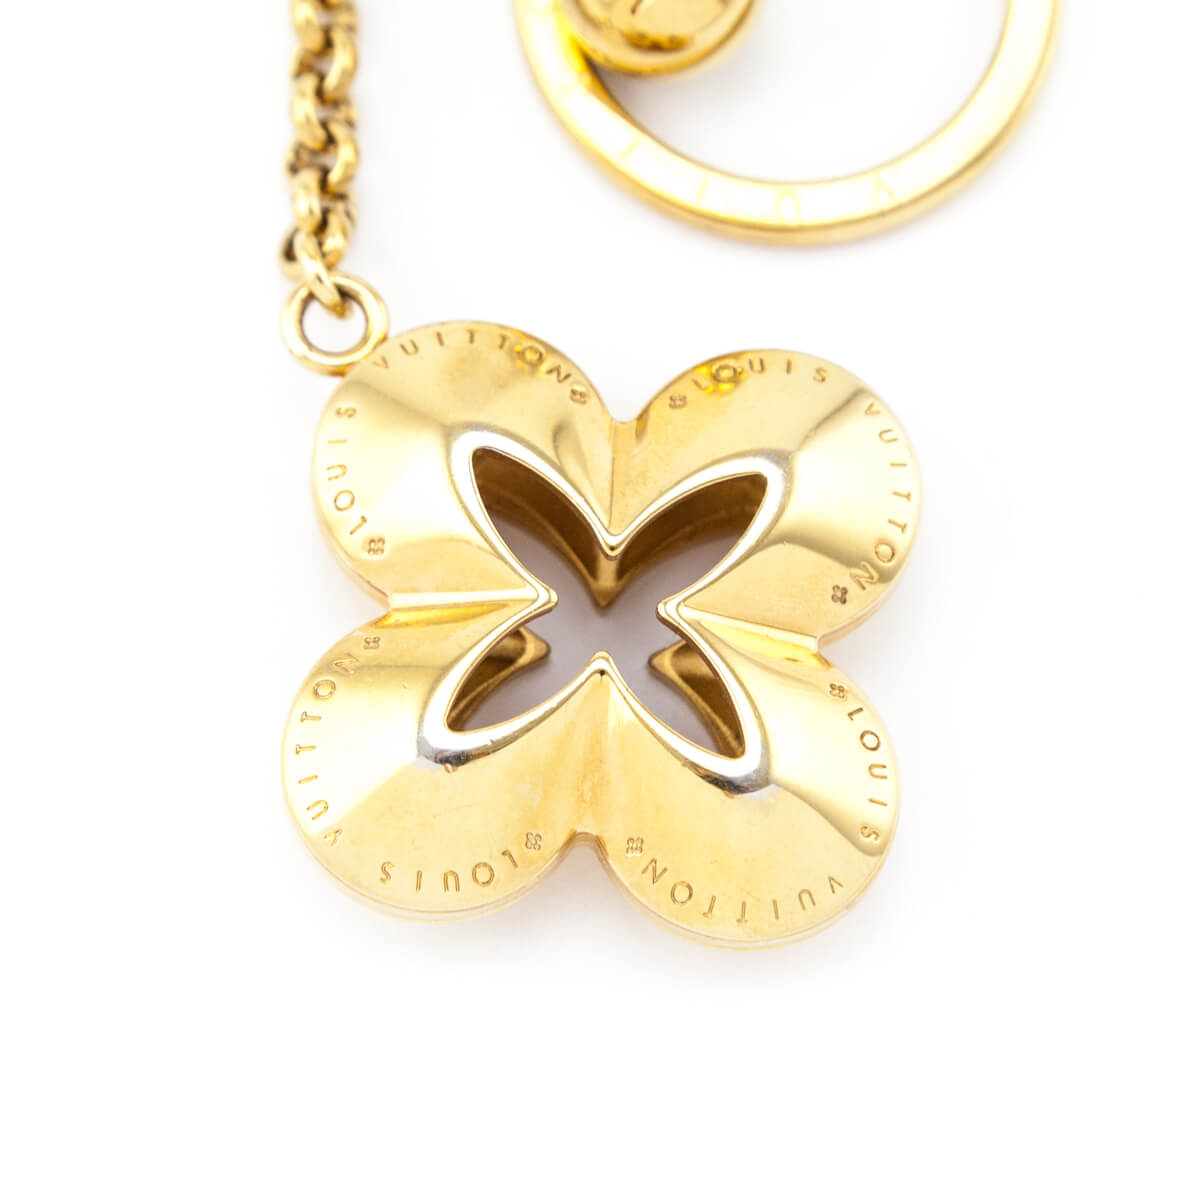 LOUIS VUITTON Monogram Flower Charm Gold Red yellow LV Auth 29863